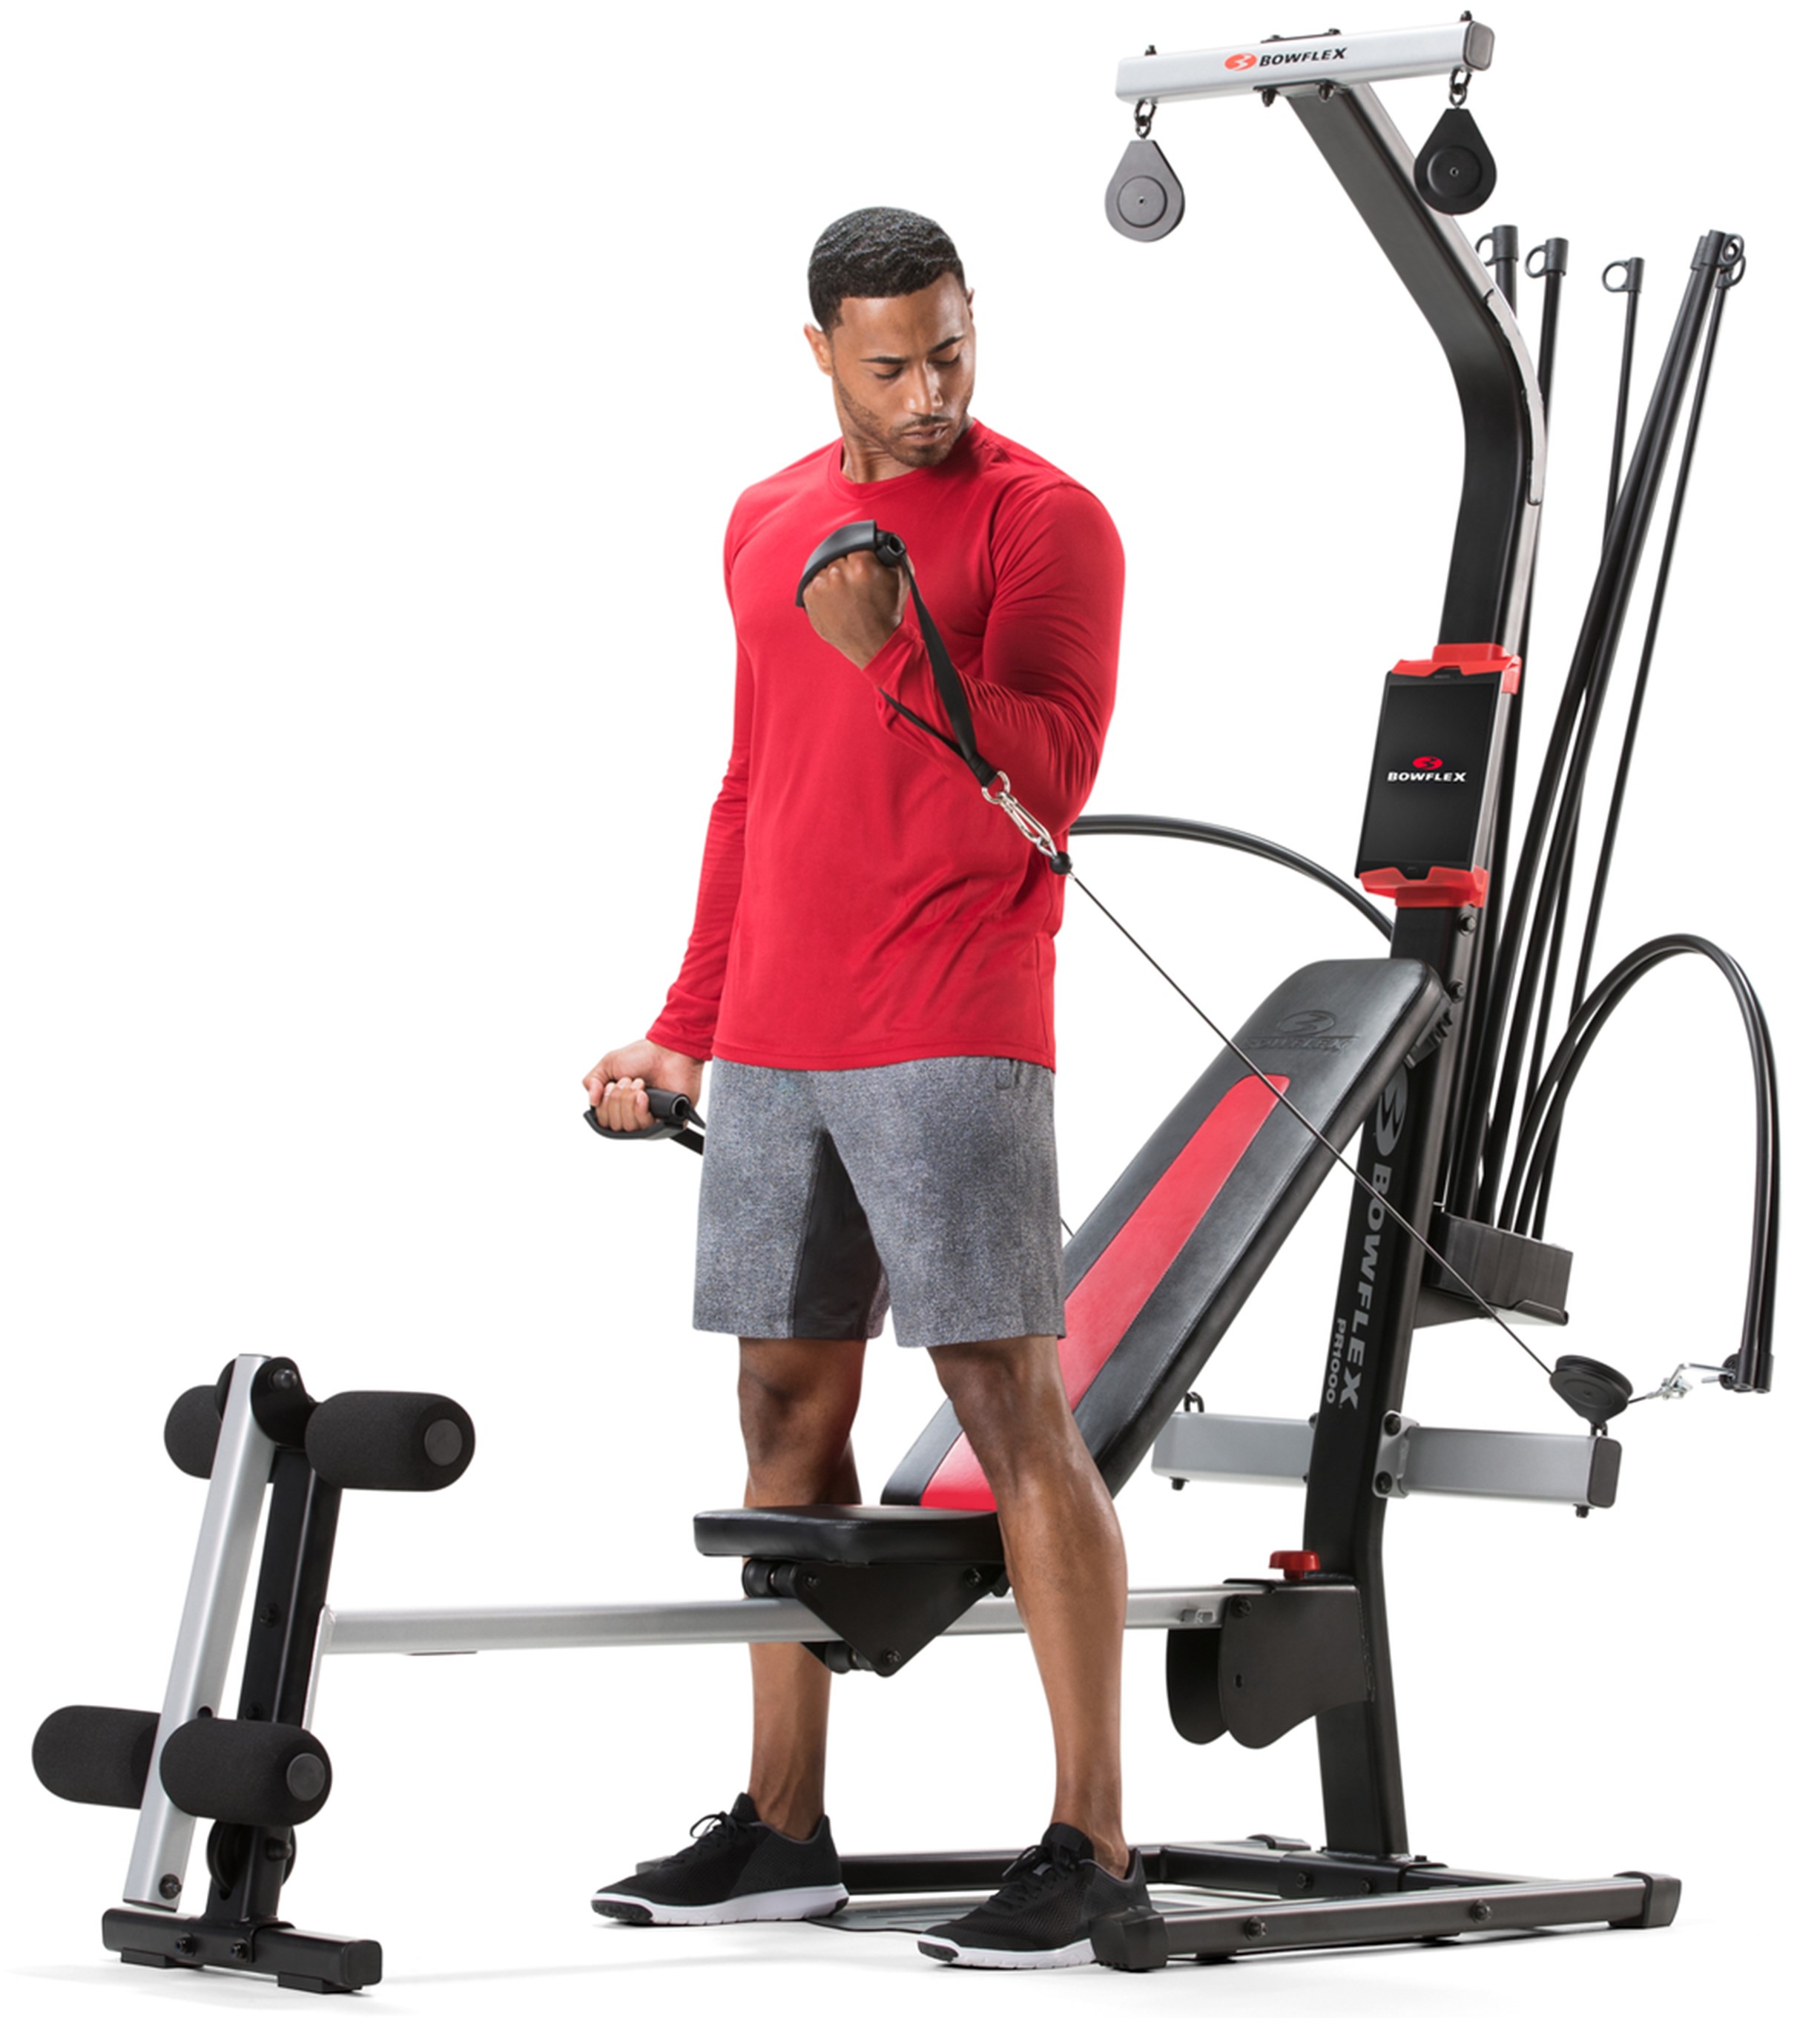 Bowflex PR1000 Home Gym Weight Lifting Aerobic Rowing and Vertical Folding Bench - image 4 of 10